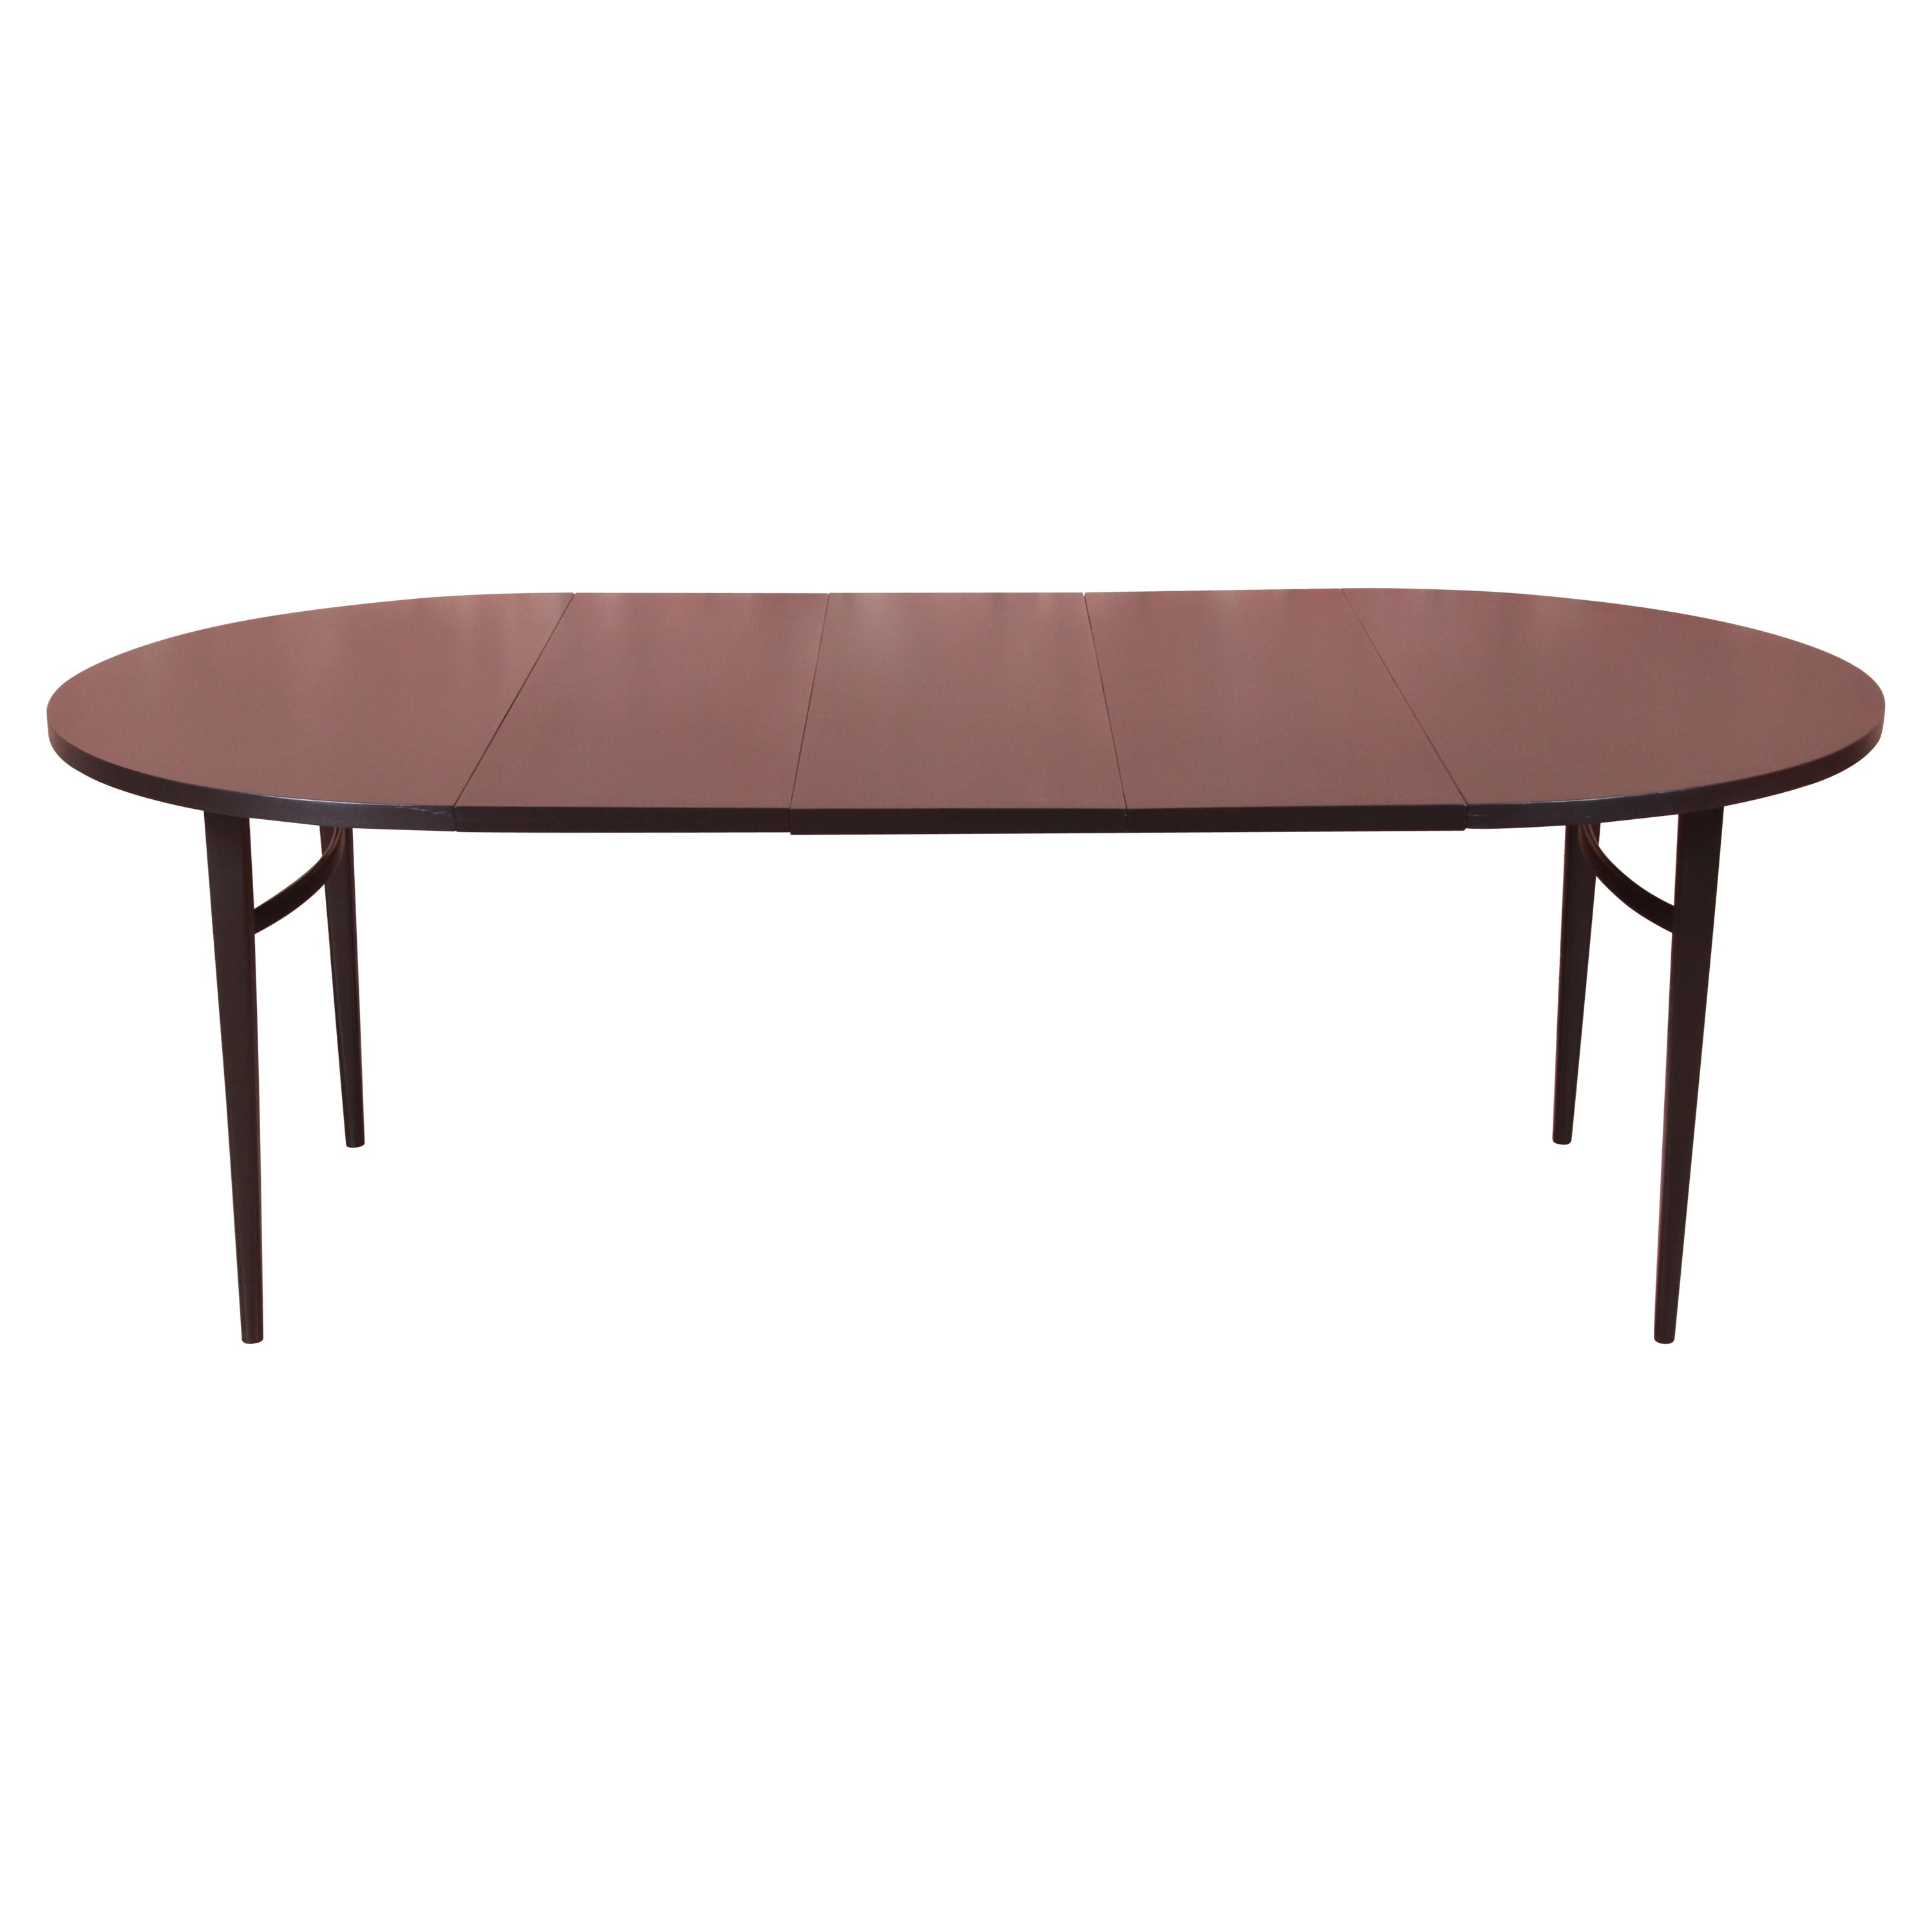 Paul McCobb Perimeter Group Black Lacquered Dining Table, Newly Refinished